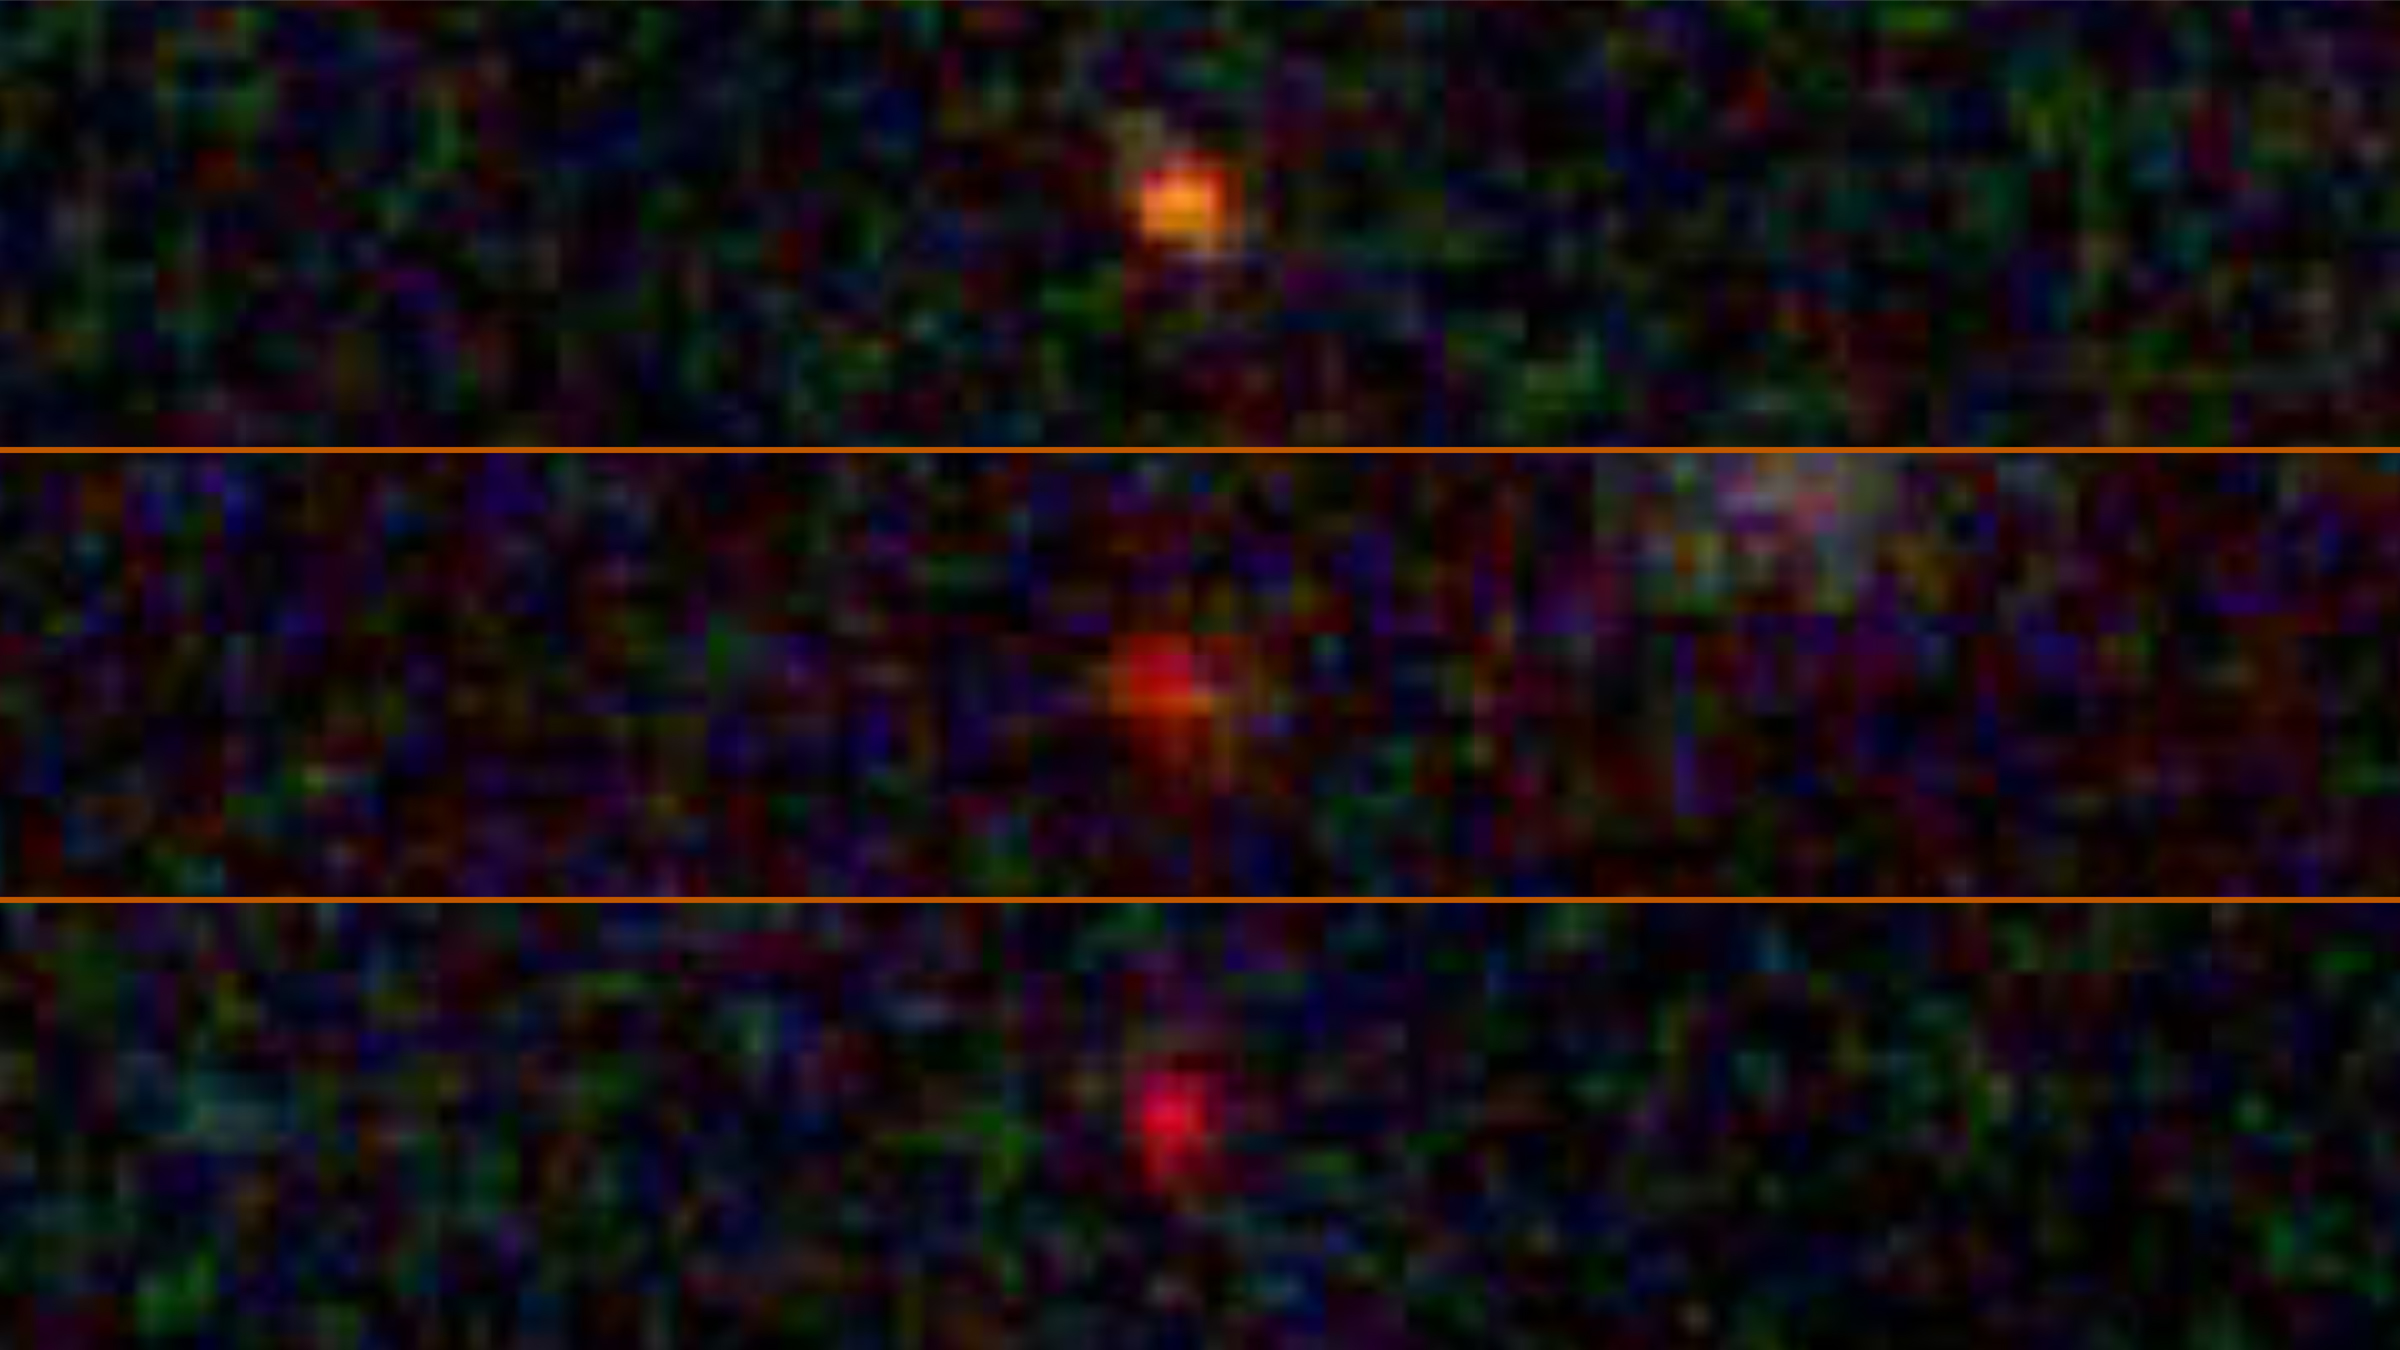 Three blurry red dots stand out in the blackness of space